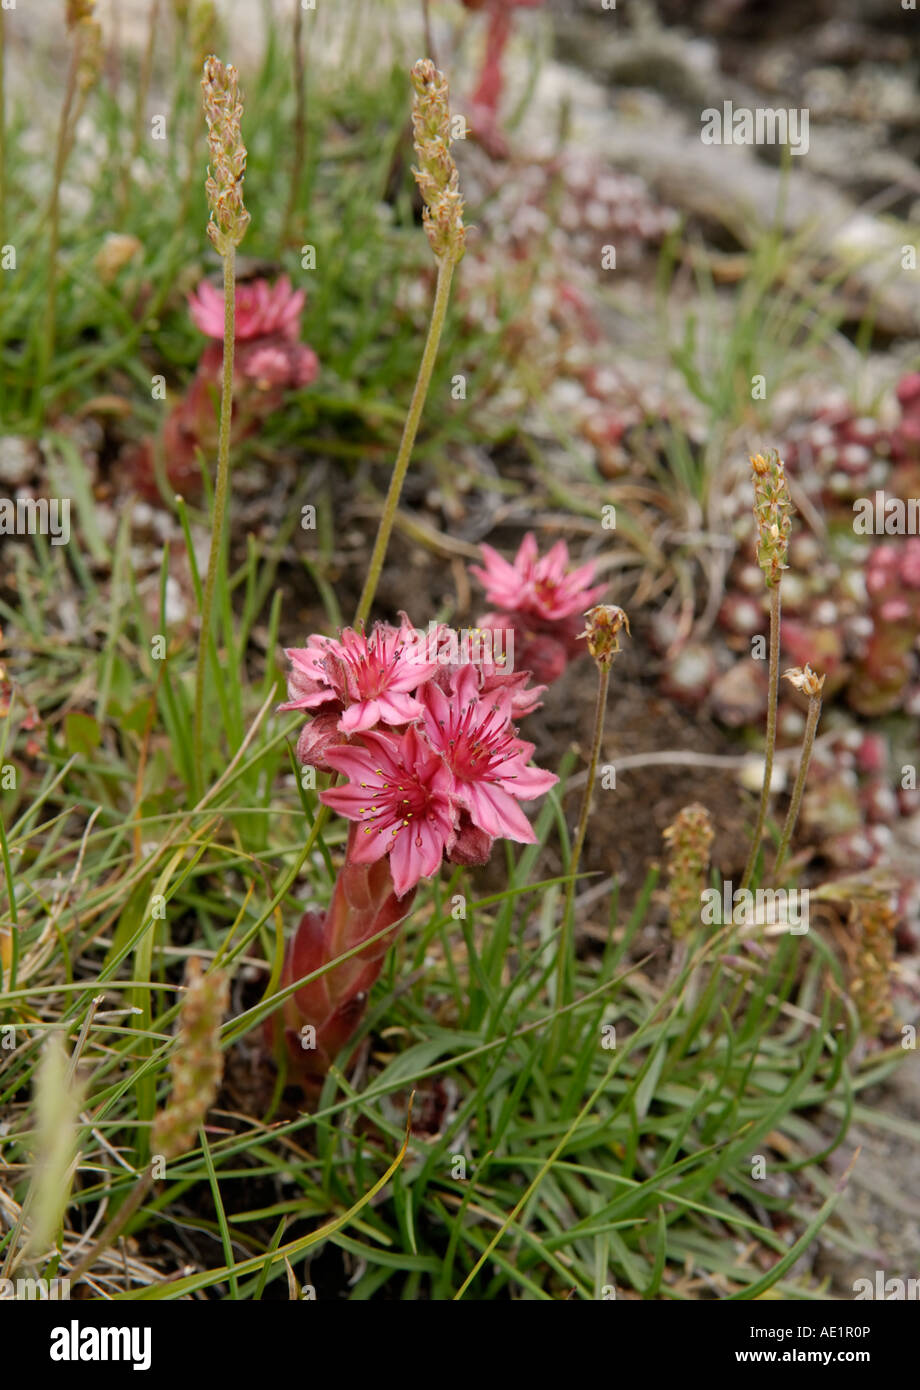 Sempervivum sp commonly known as houseleeks or liveforever flowers in an alpine meadow Stock Photo